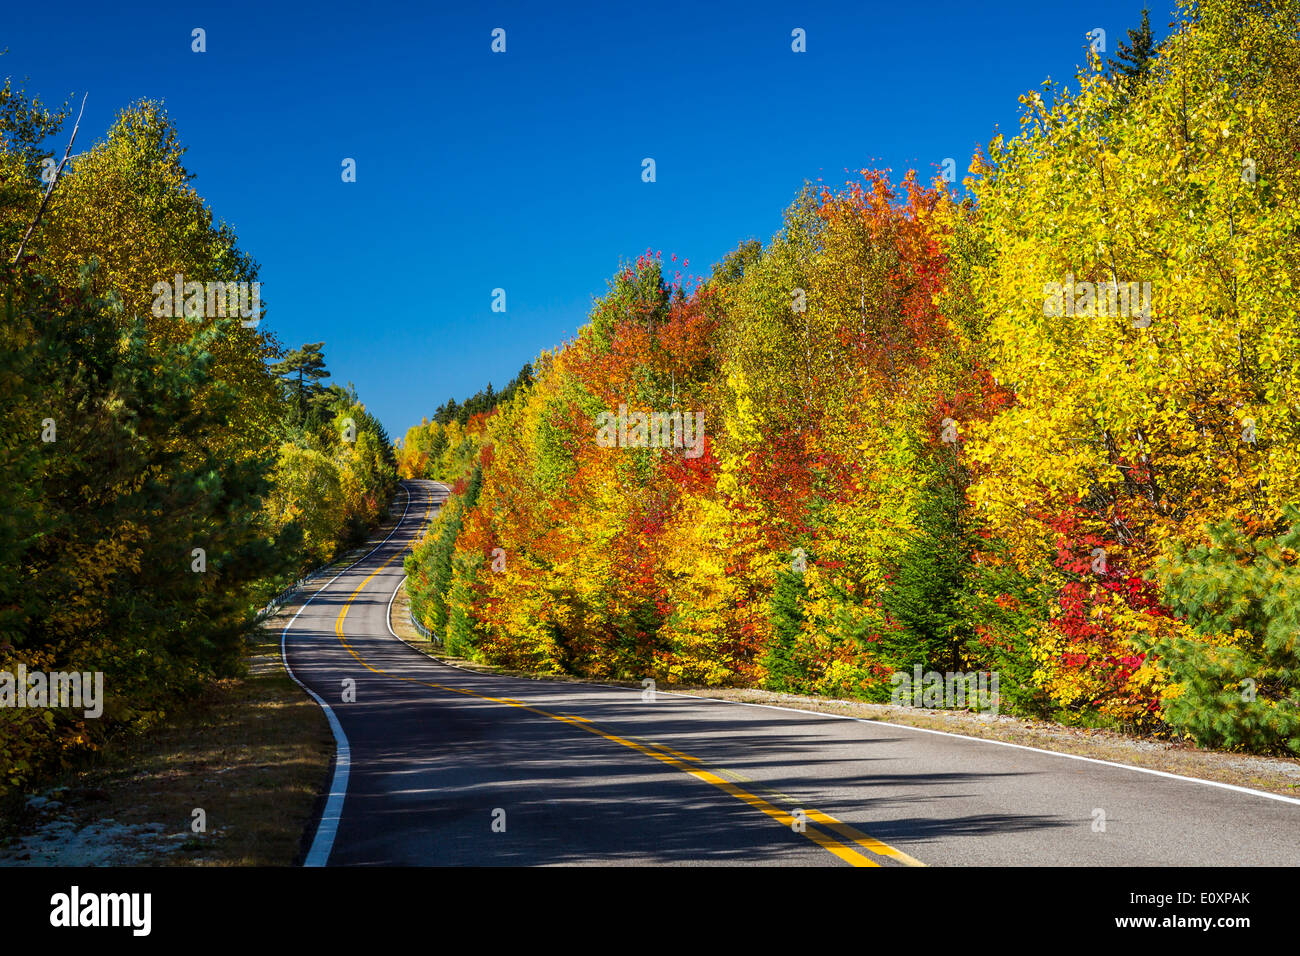 Fall foliage color in the trees with a park roadway in La Maurice National Park, Quebec, Canada. Stock Photo